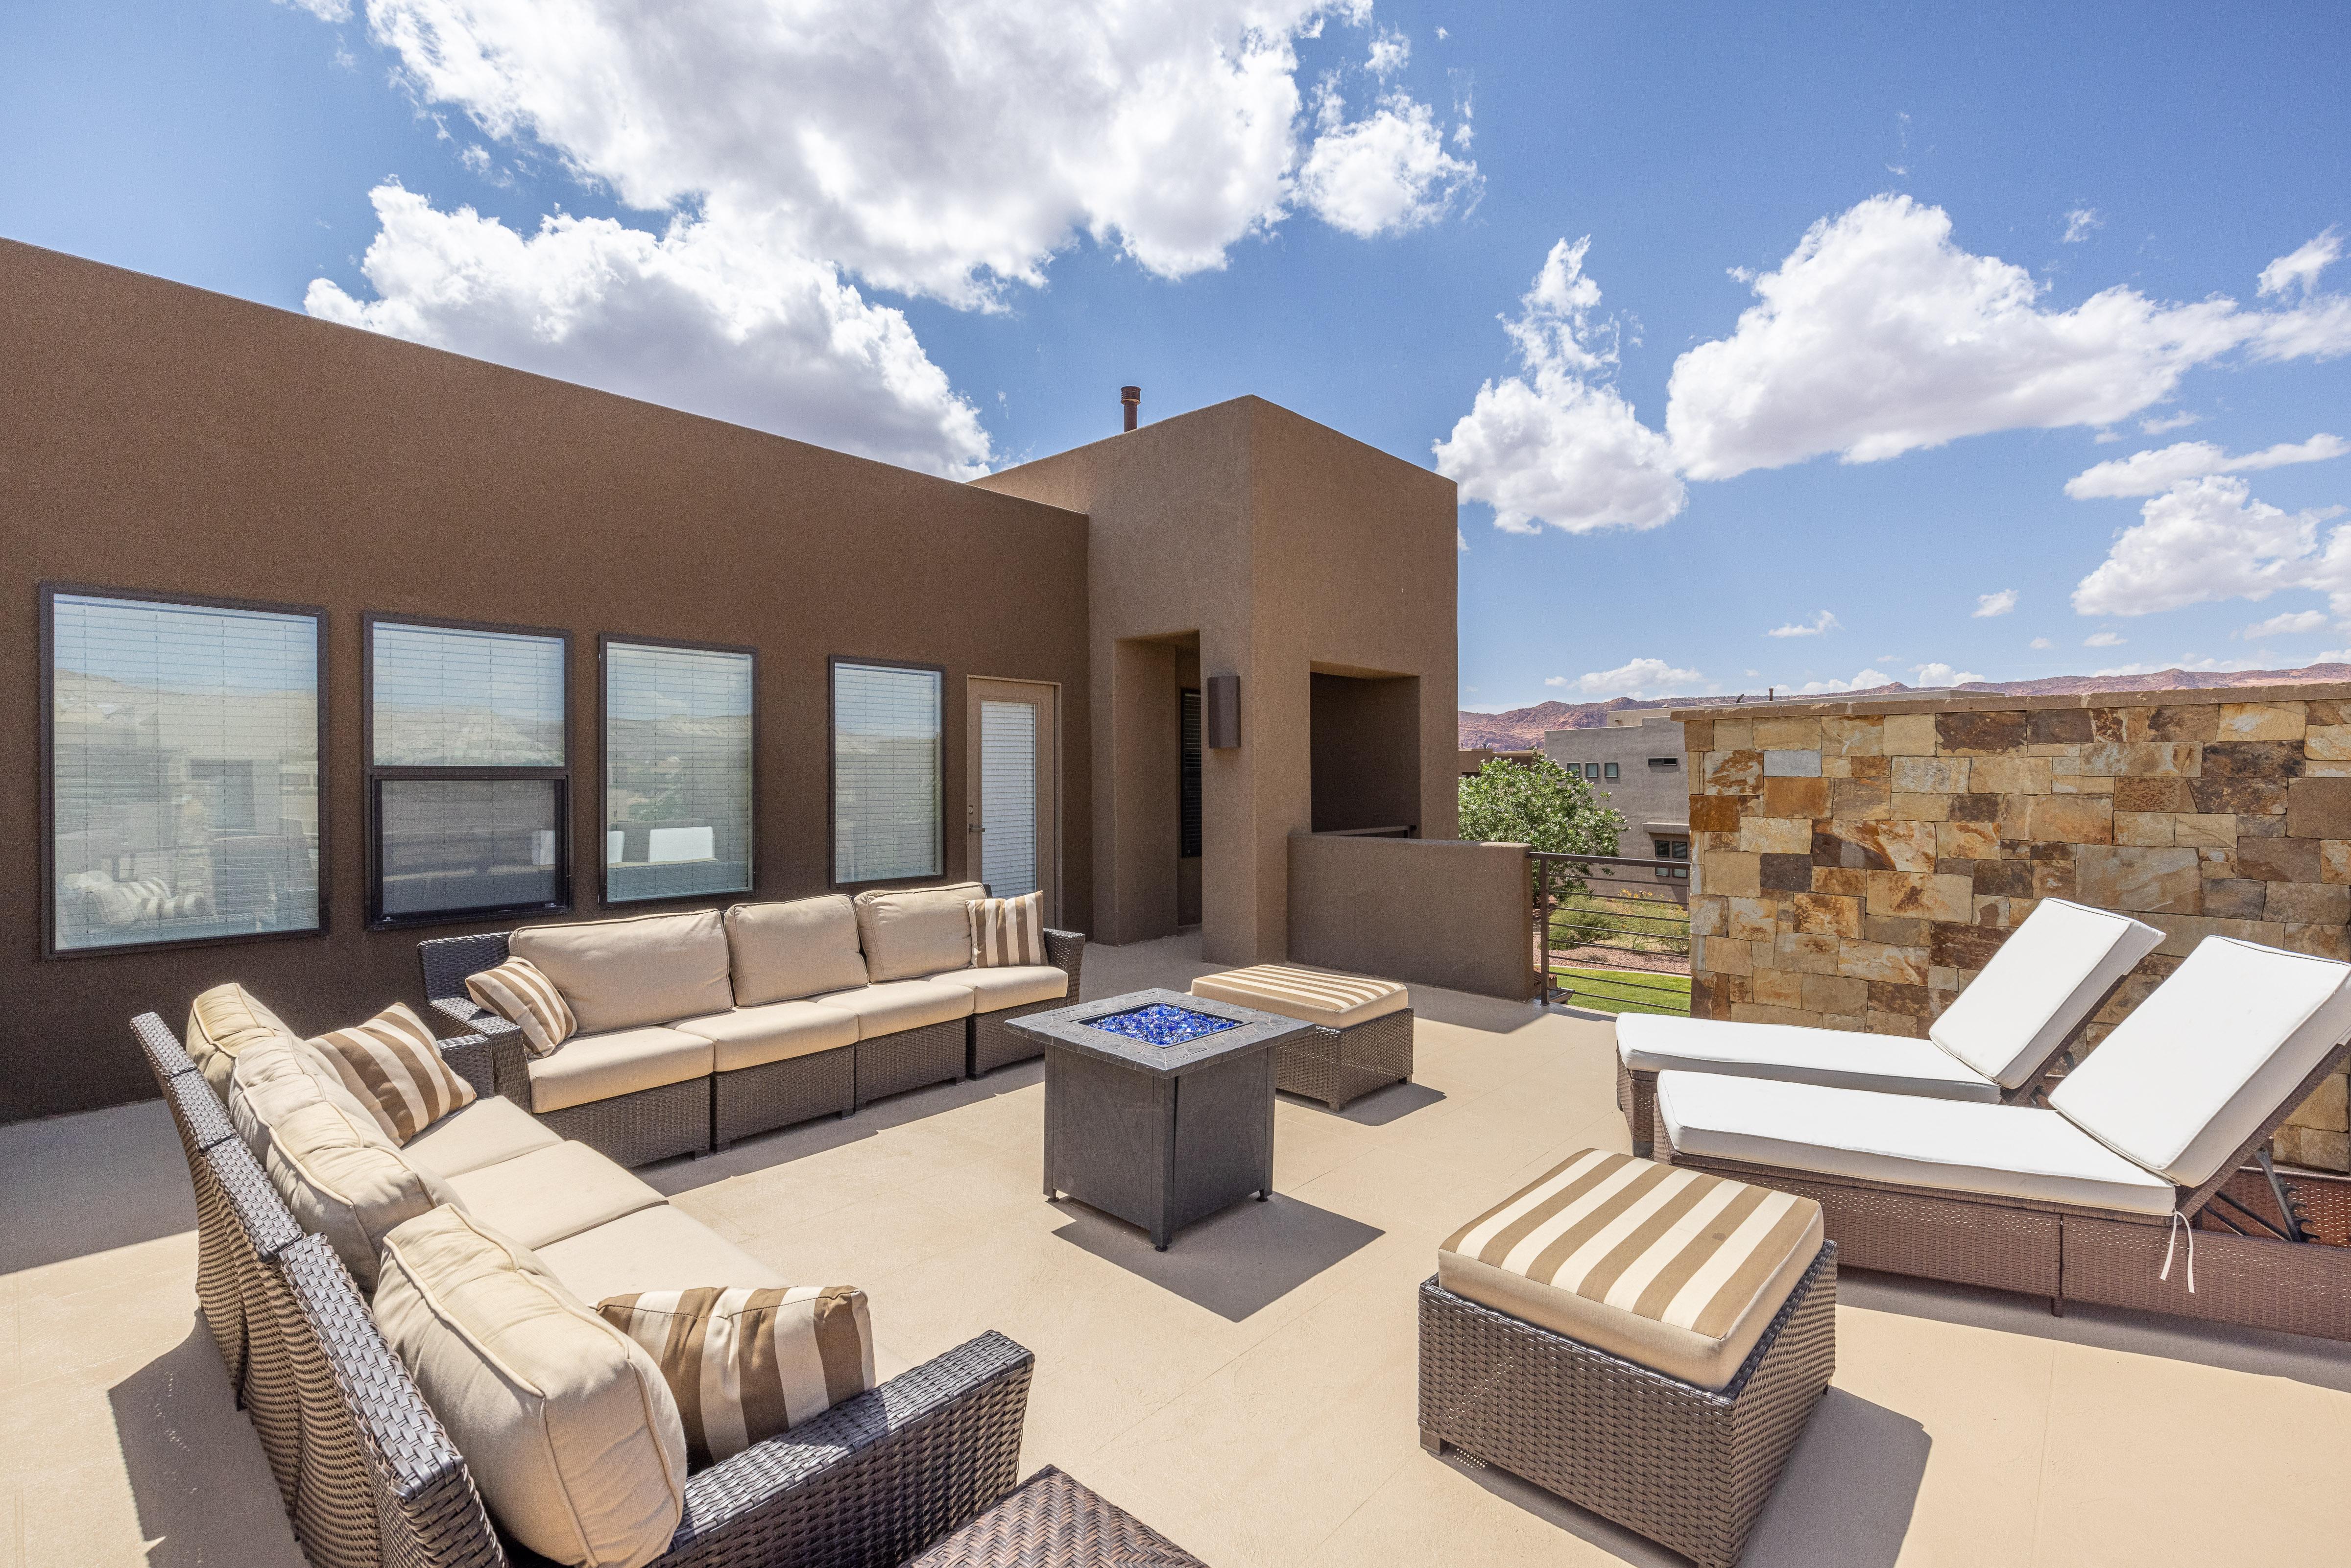 The Front Patio is a spacious area to entertain guests while enjoying the beautiful surrounding landscapes of Snow Canyon State Park